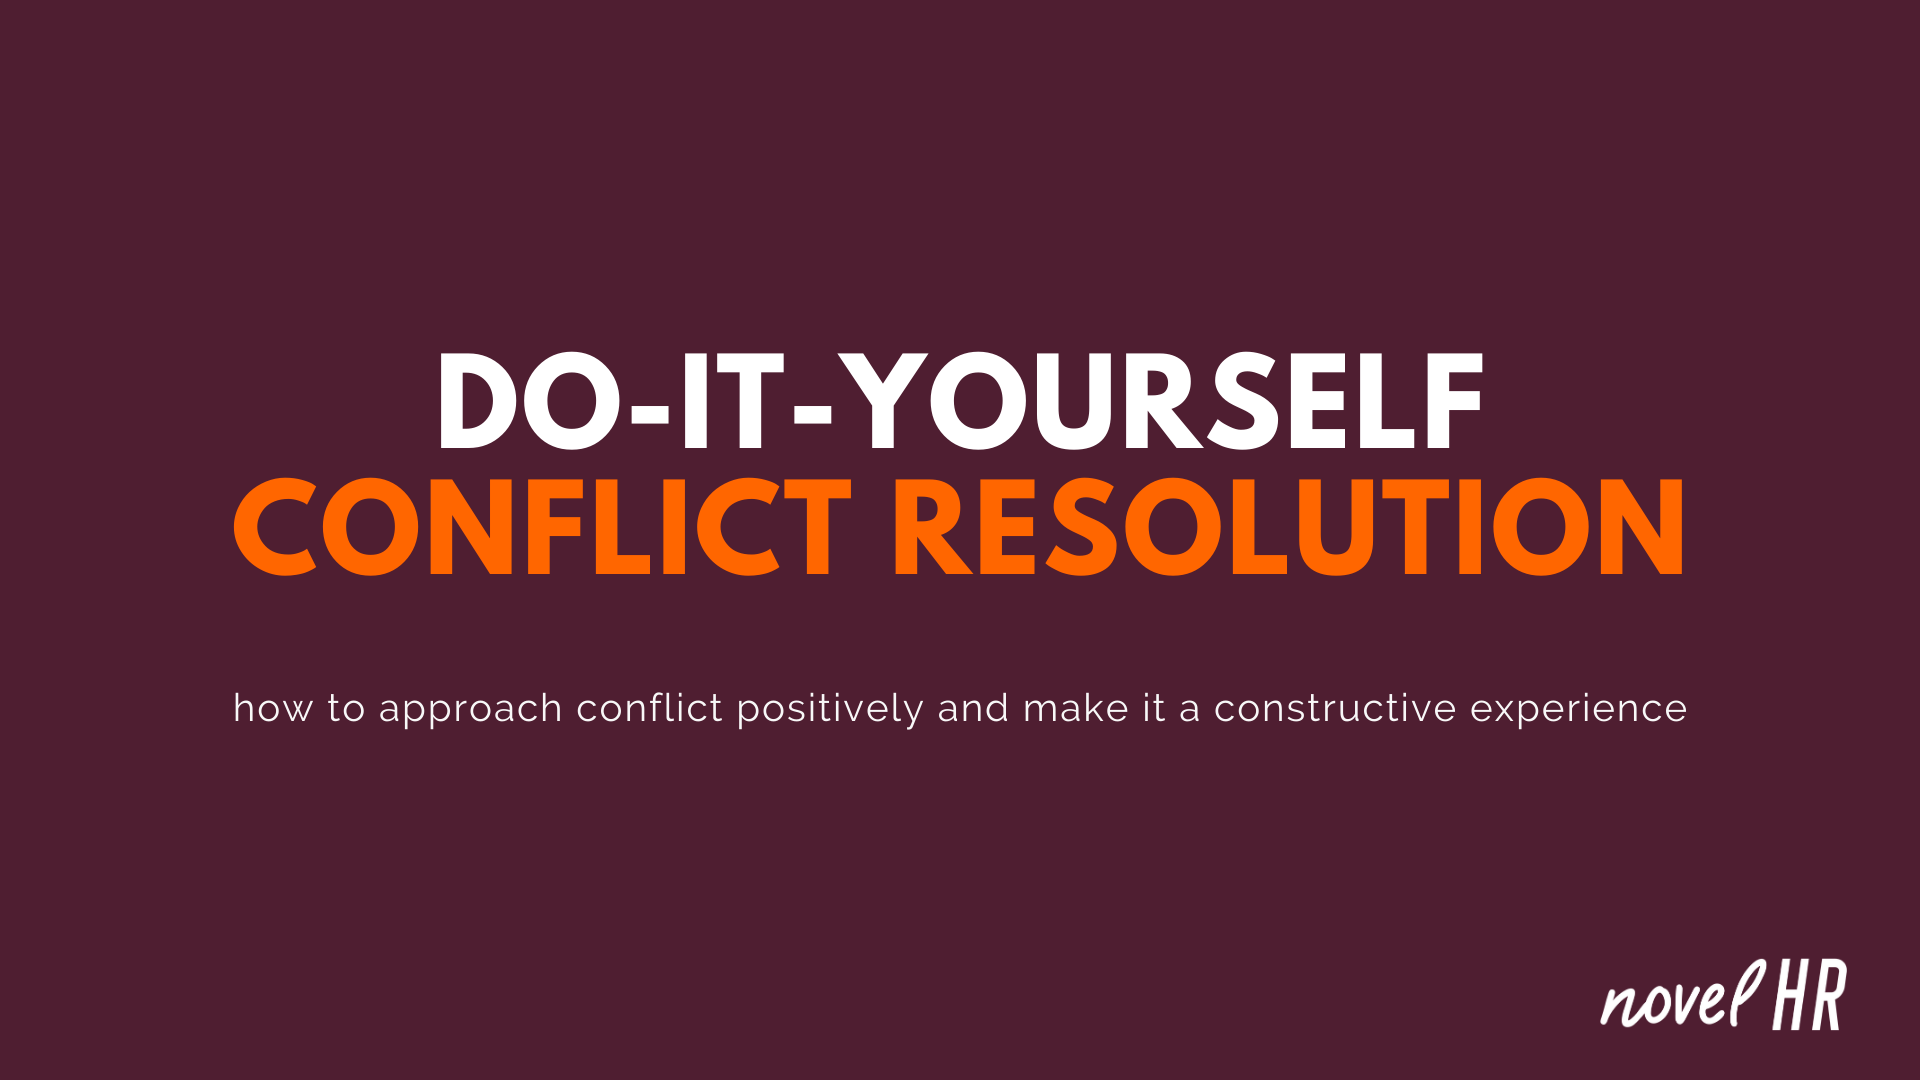 on a purple backgrount, the title of the webinar - Do It Yourself Conflict Resolution, and underneath: "how to approach conflict positively and make it a constructive experience"